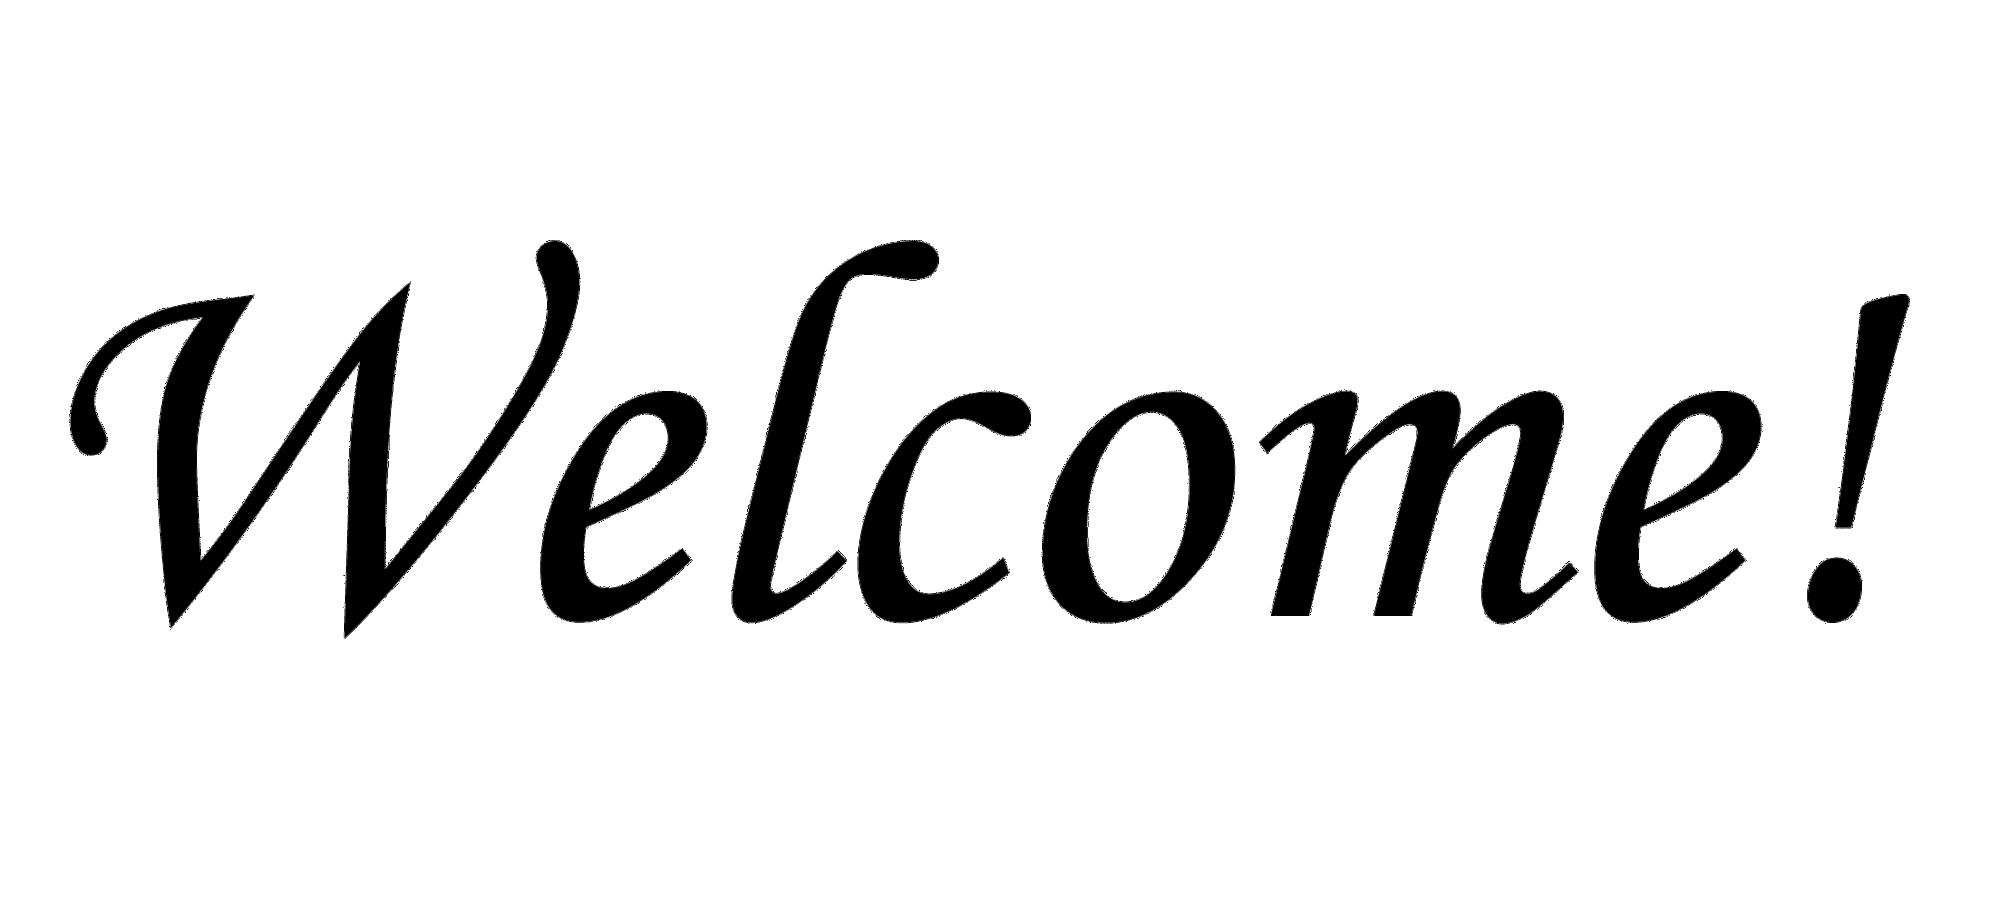 Welcome word. Слово Welcome. Надпись Welcome. Надпись вэлком красивая. Трафарет Welcome.